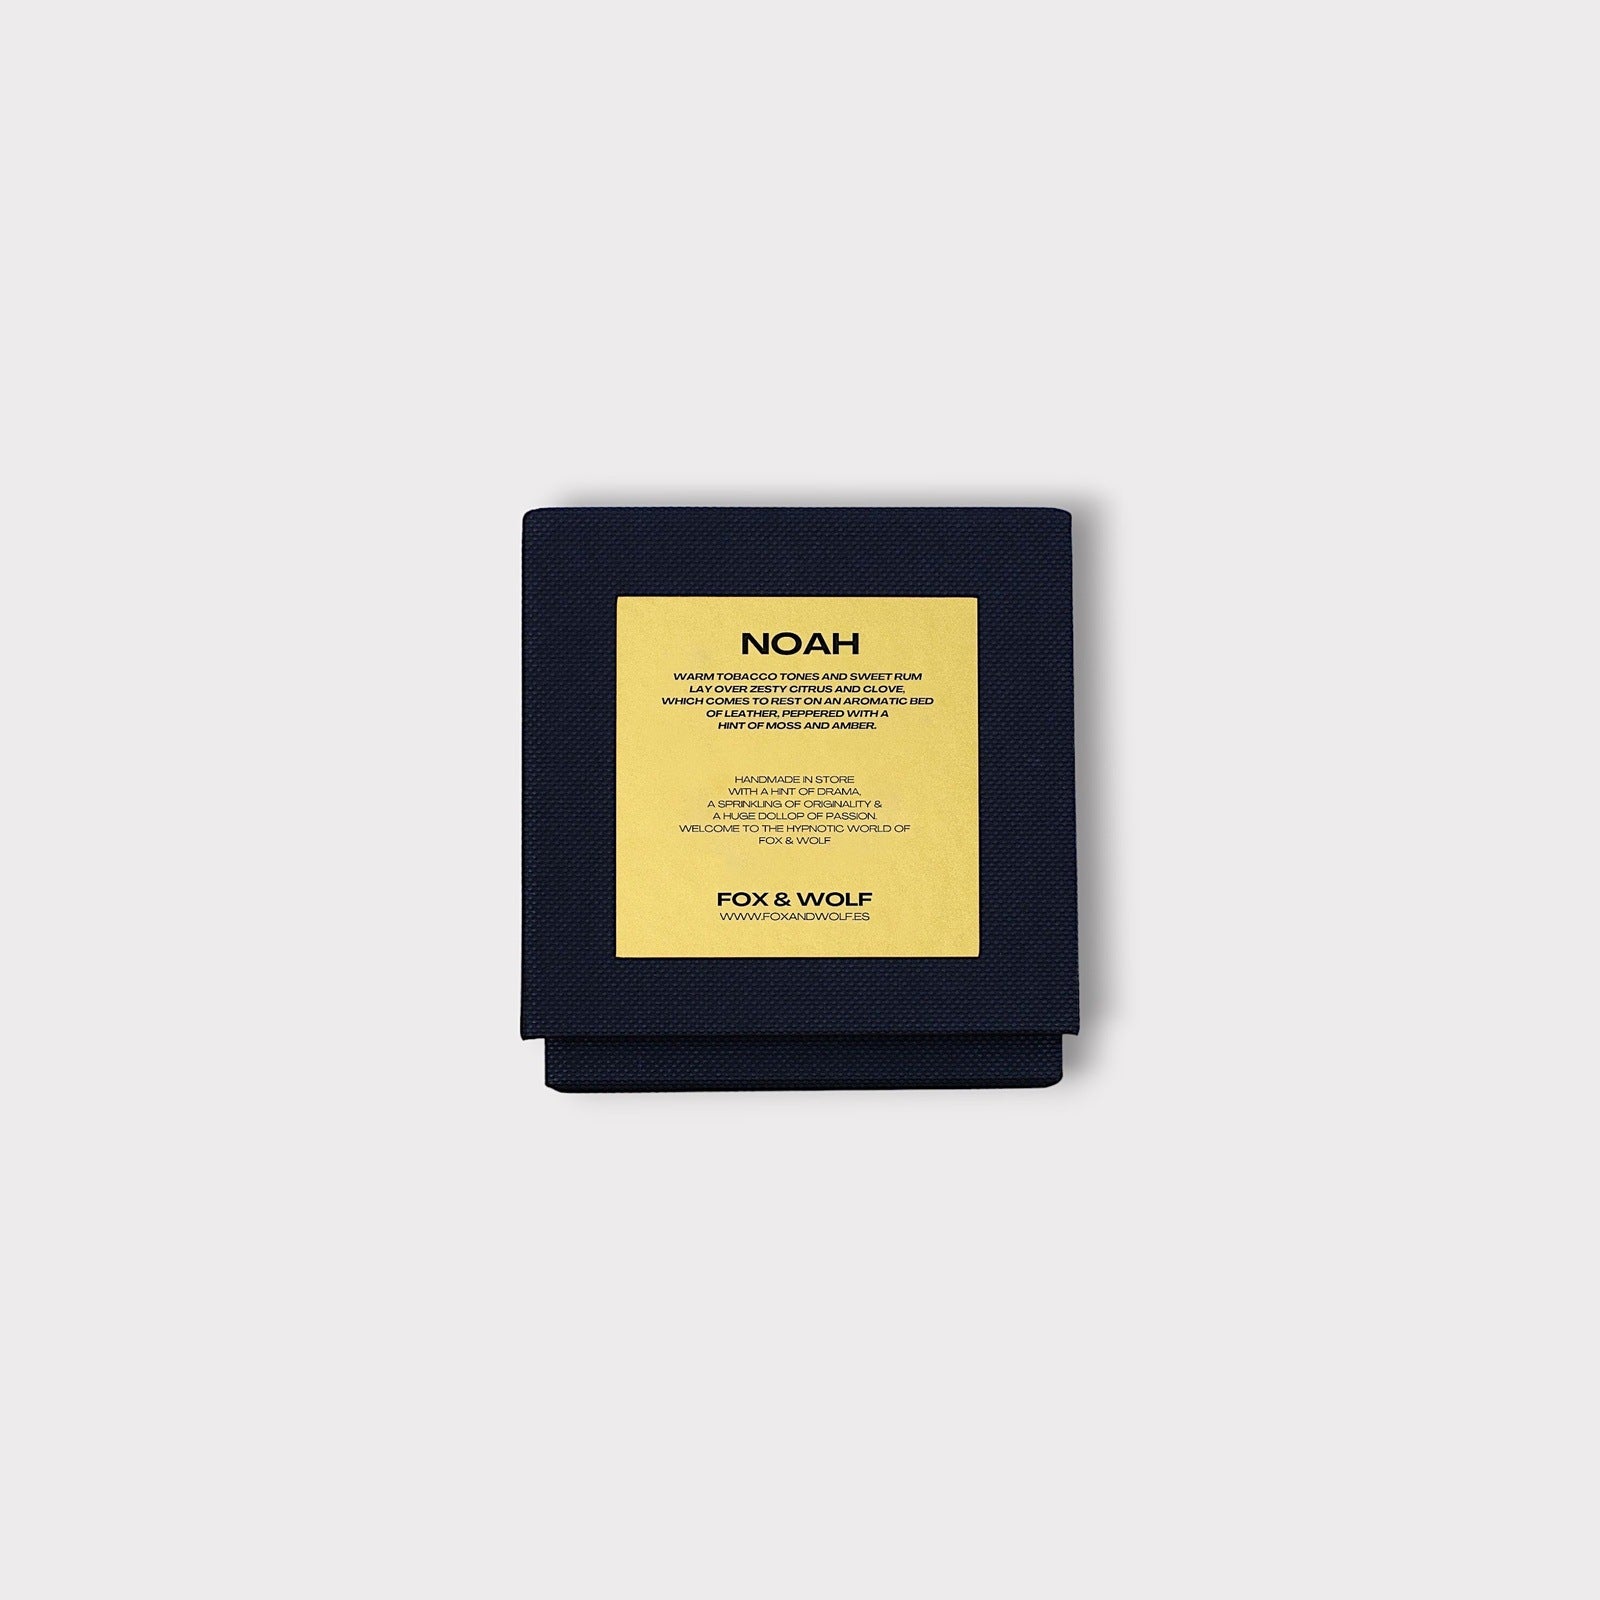 300 G NOAH SCENTED CANDLE